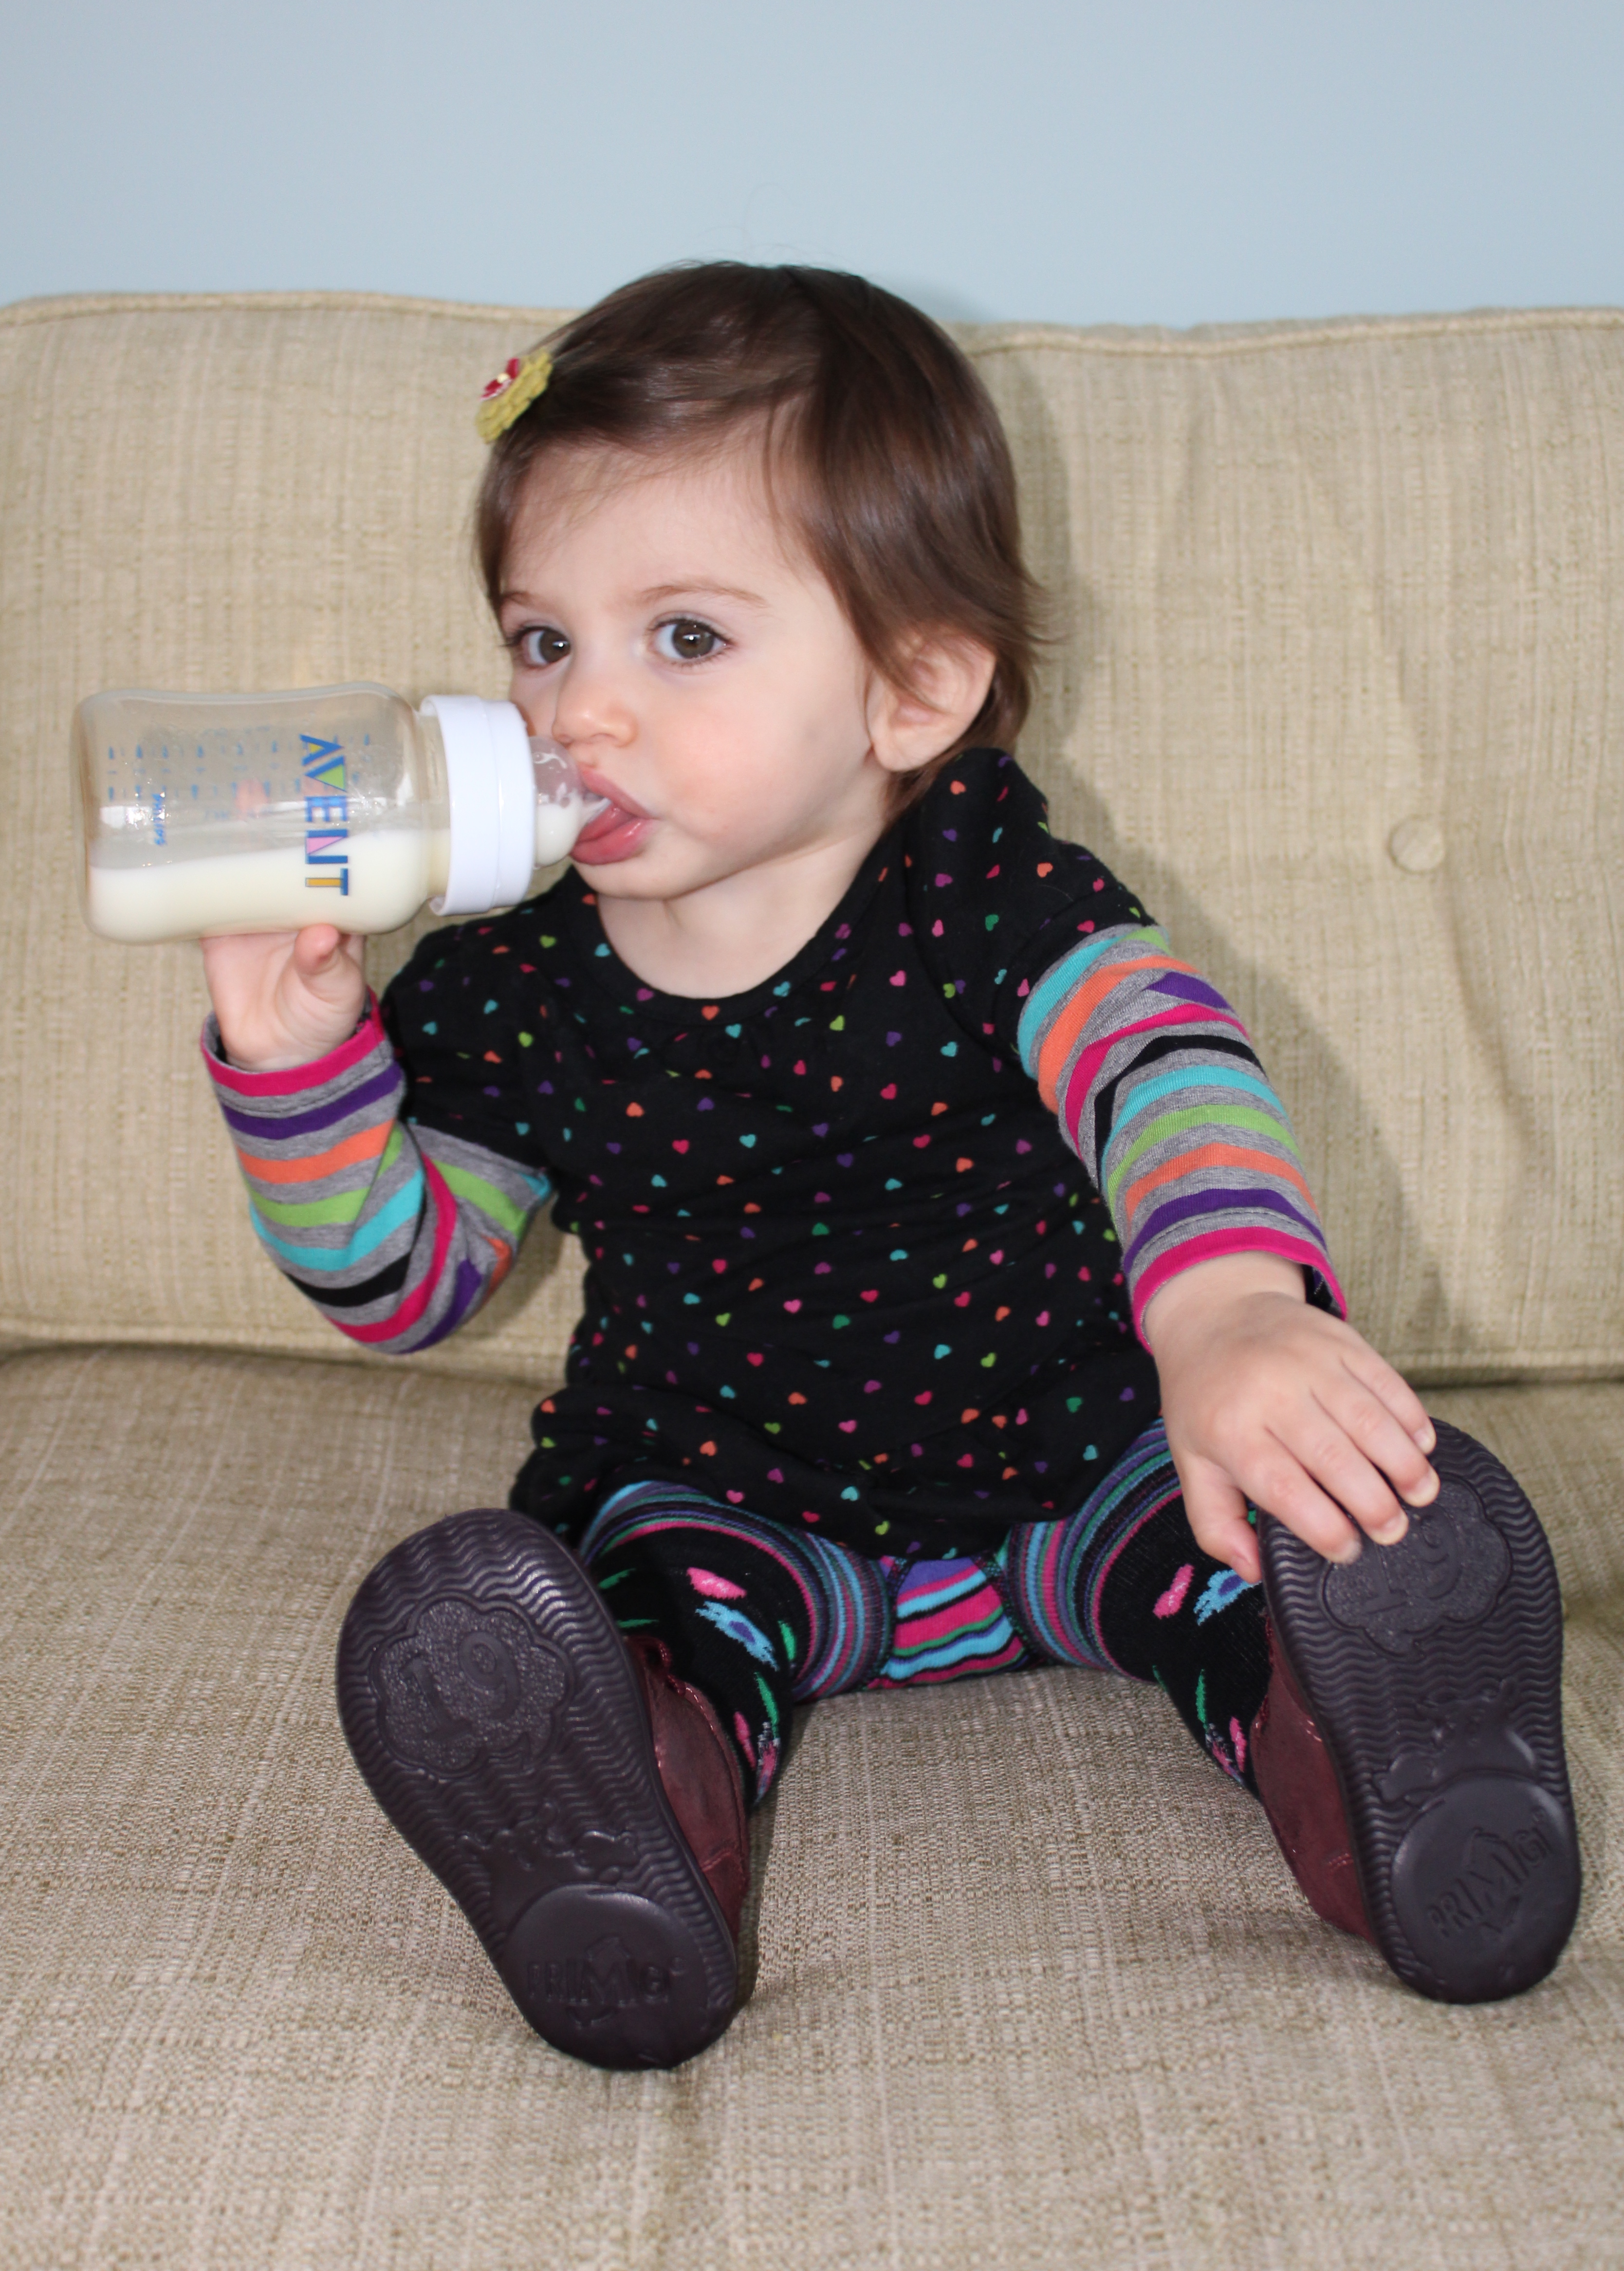 Transitioning Your Child From a Bottle to a Sippy Cup